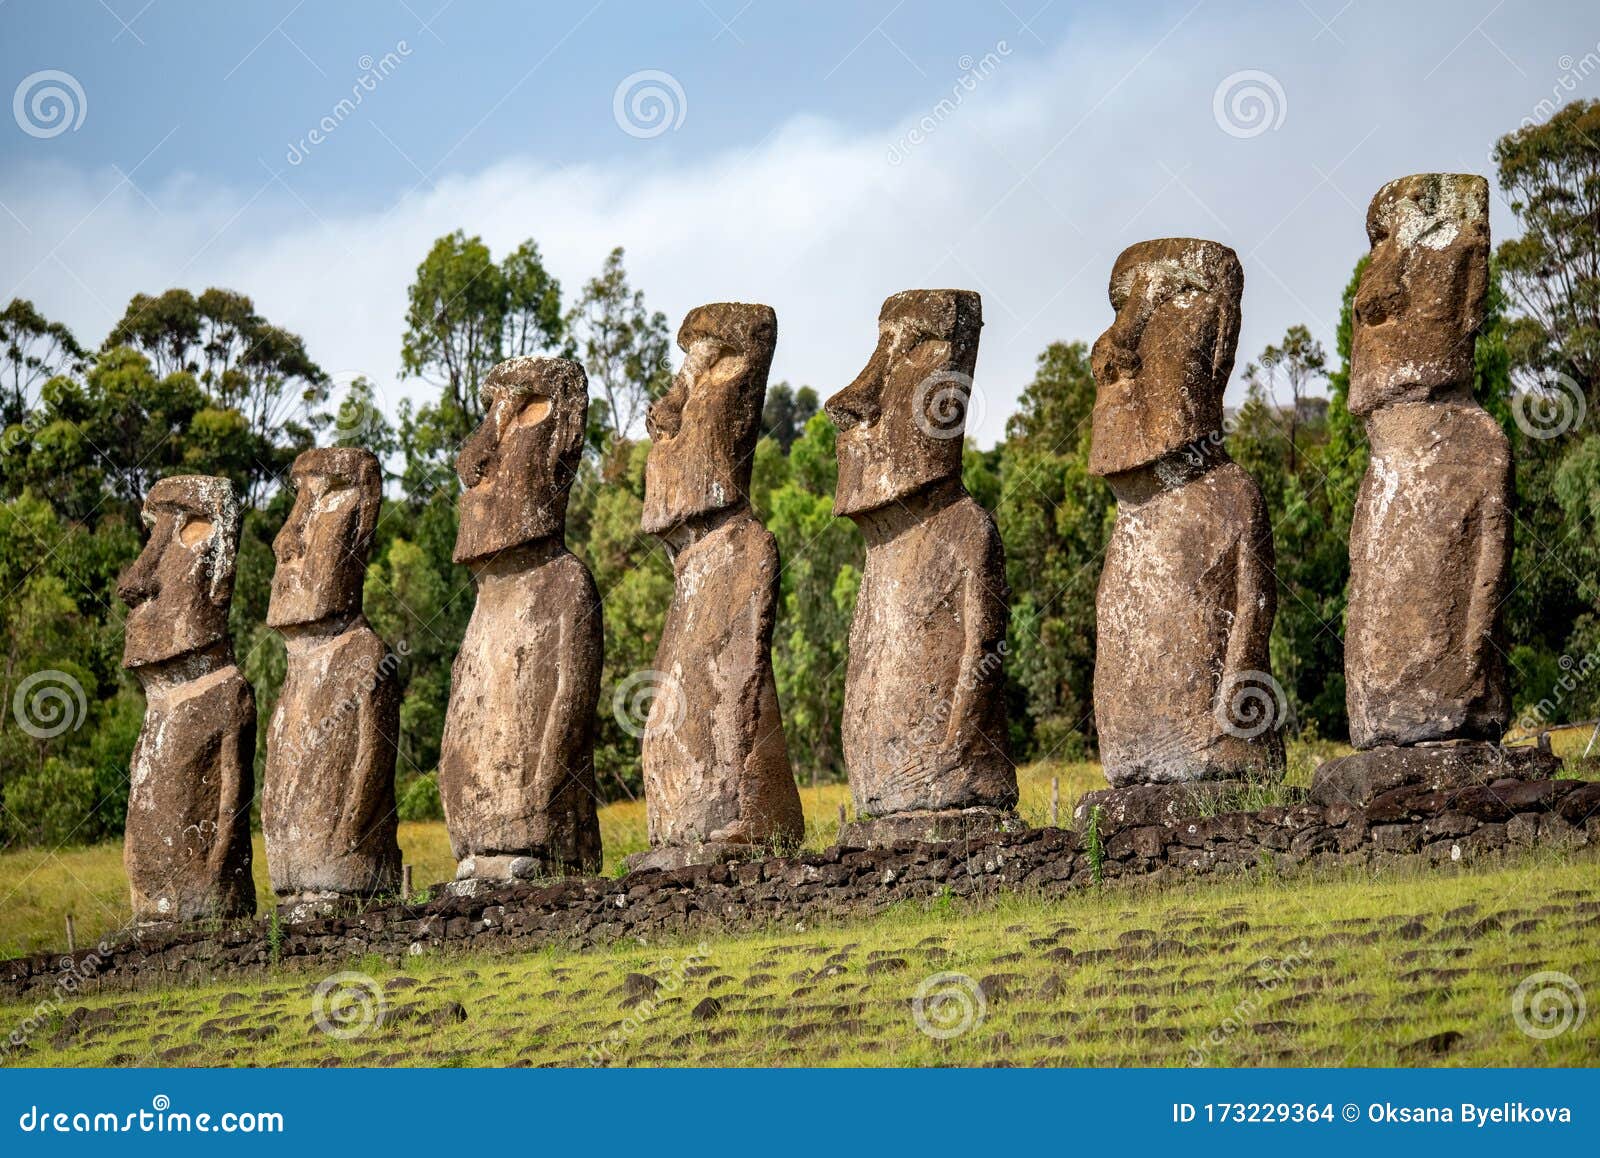 The 10 Best Ahu Akivi Tours & Tickets 2021 - Easter Island 